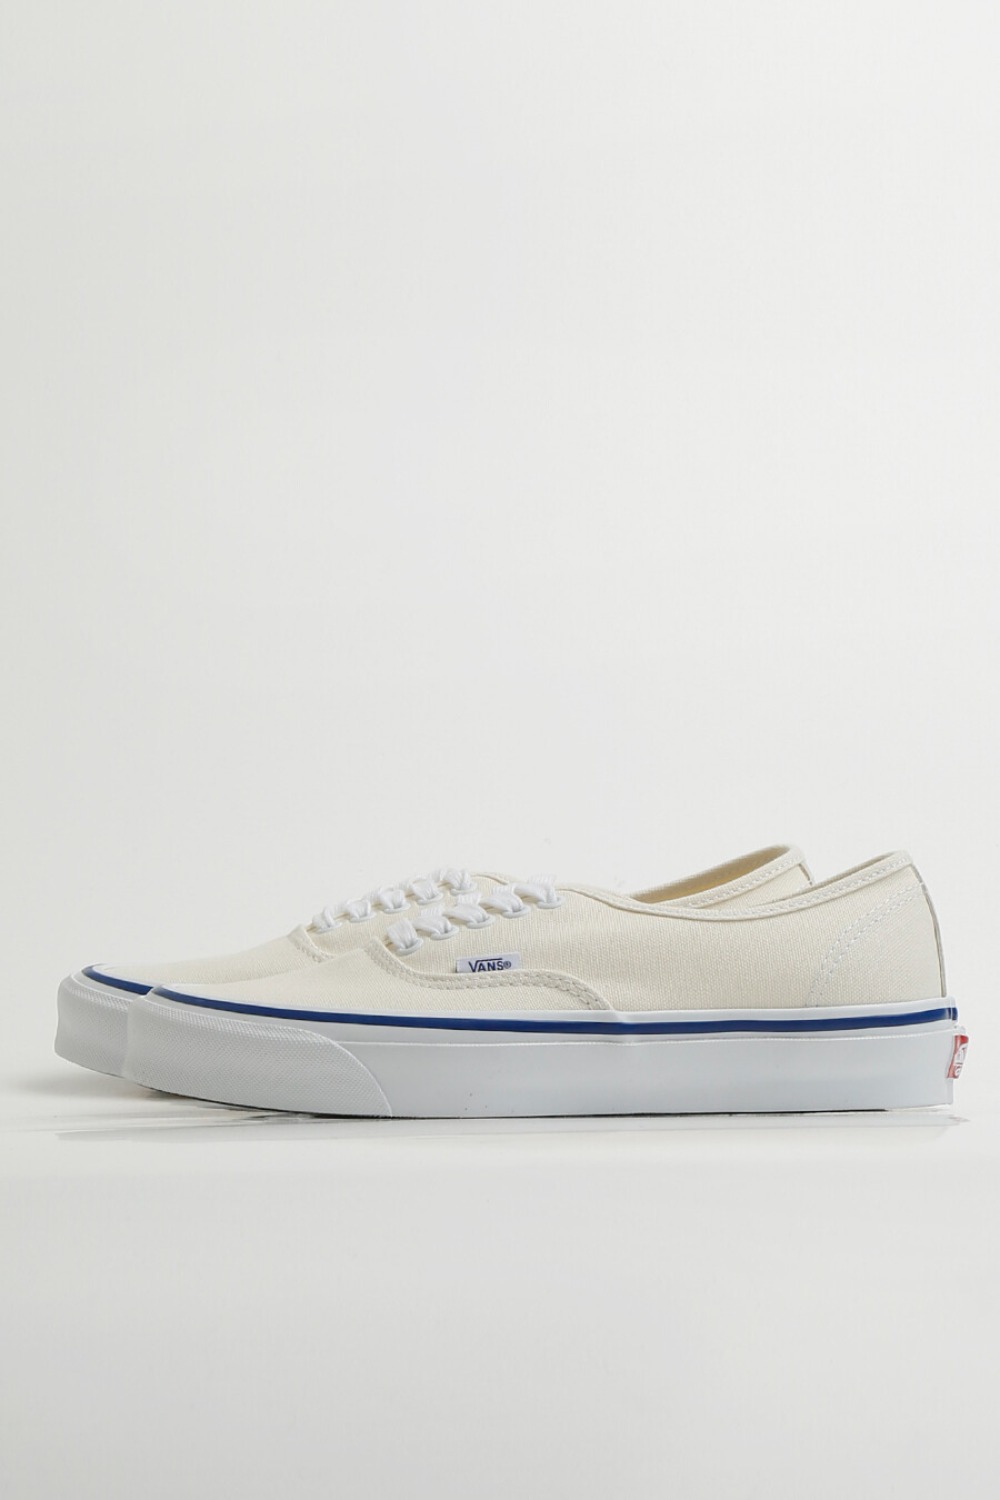 OG AUTHENTIC LX(CANVAS)CLASSIC WHITE